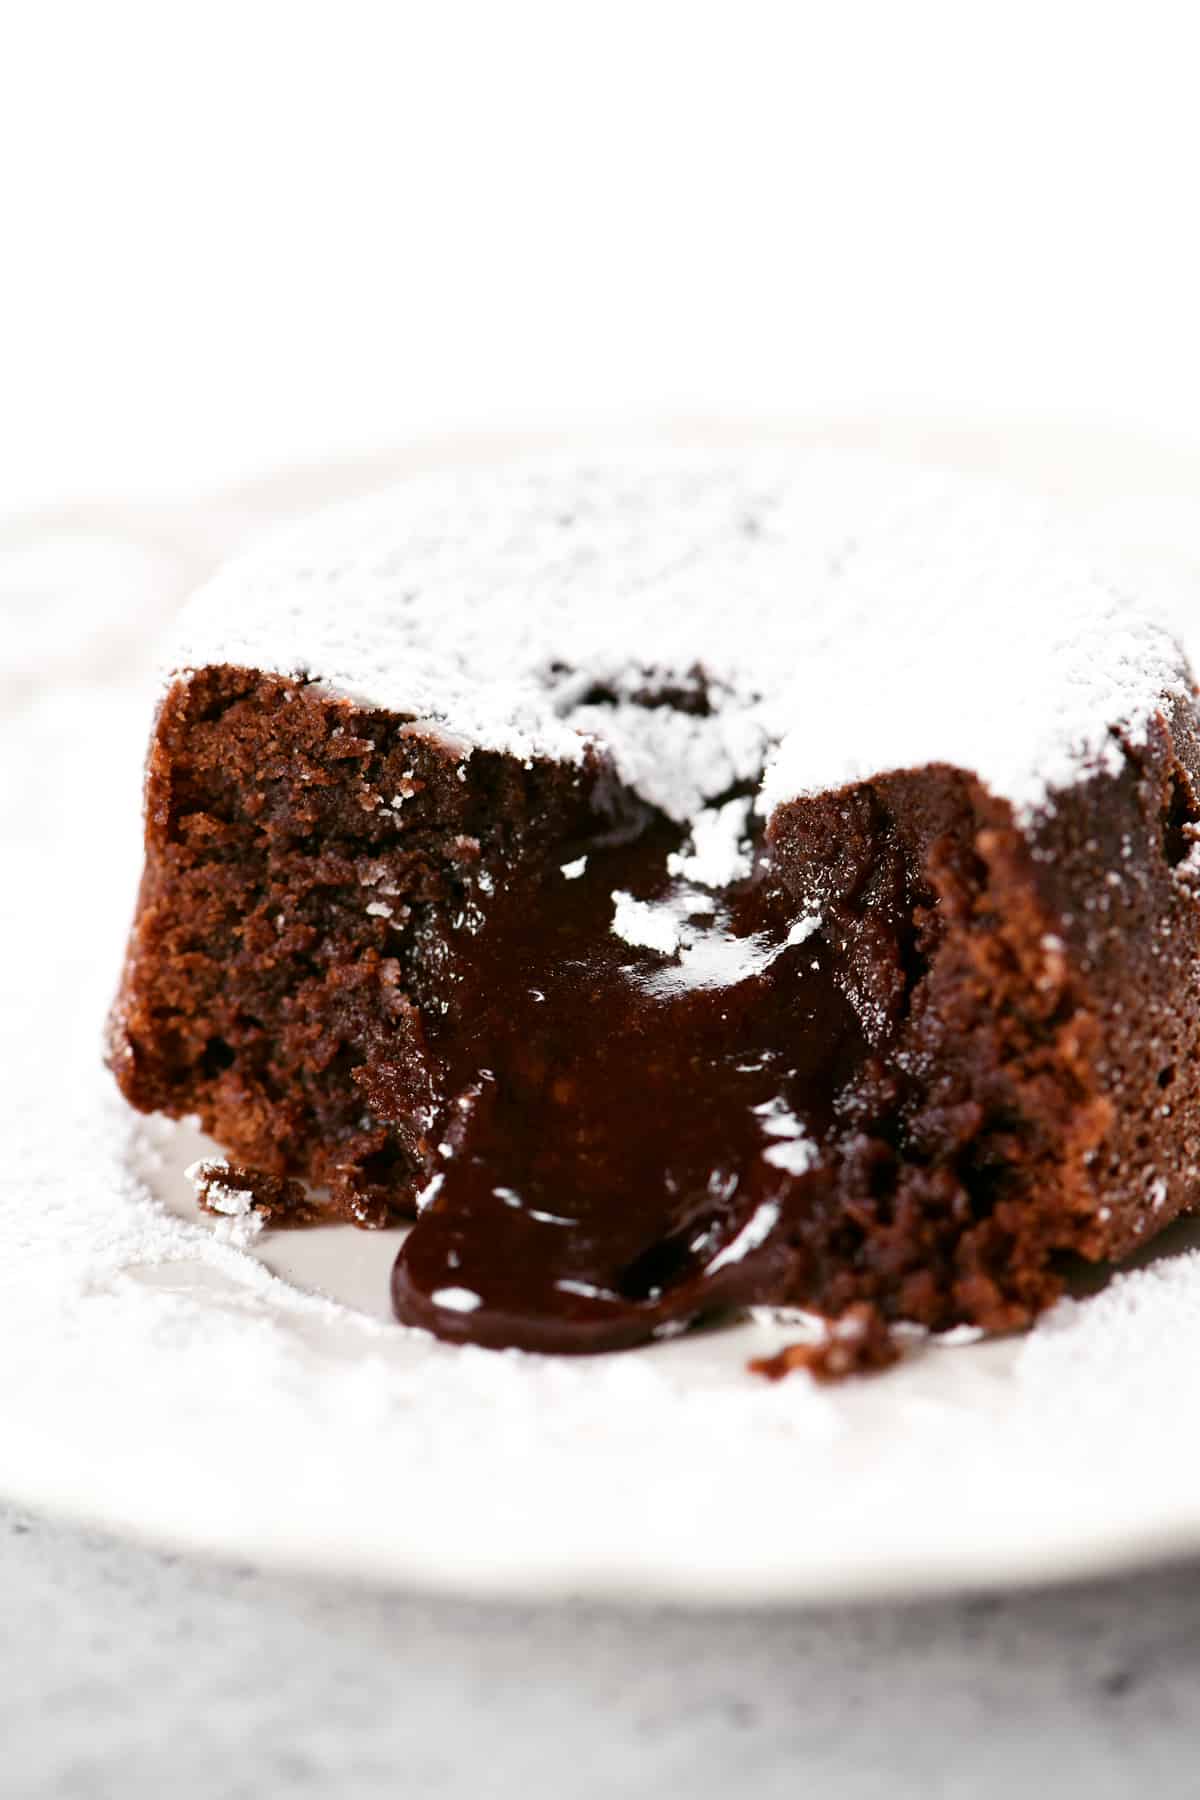 filling oozes out of a chocolate lava cake.